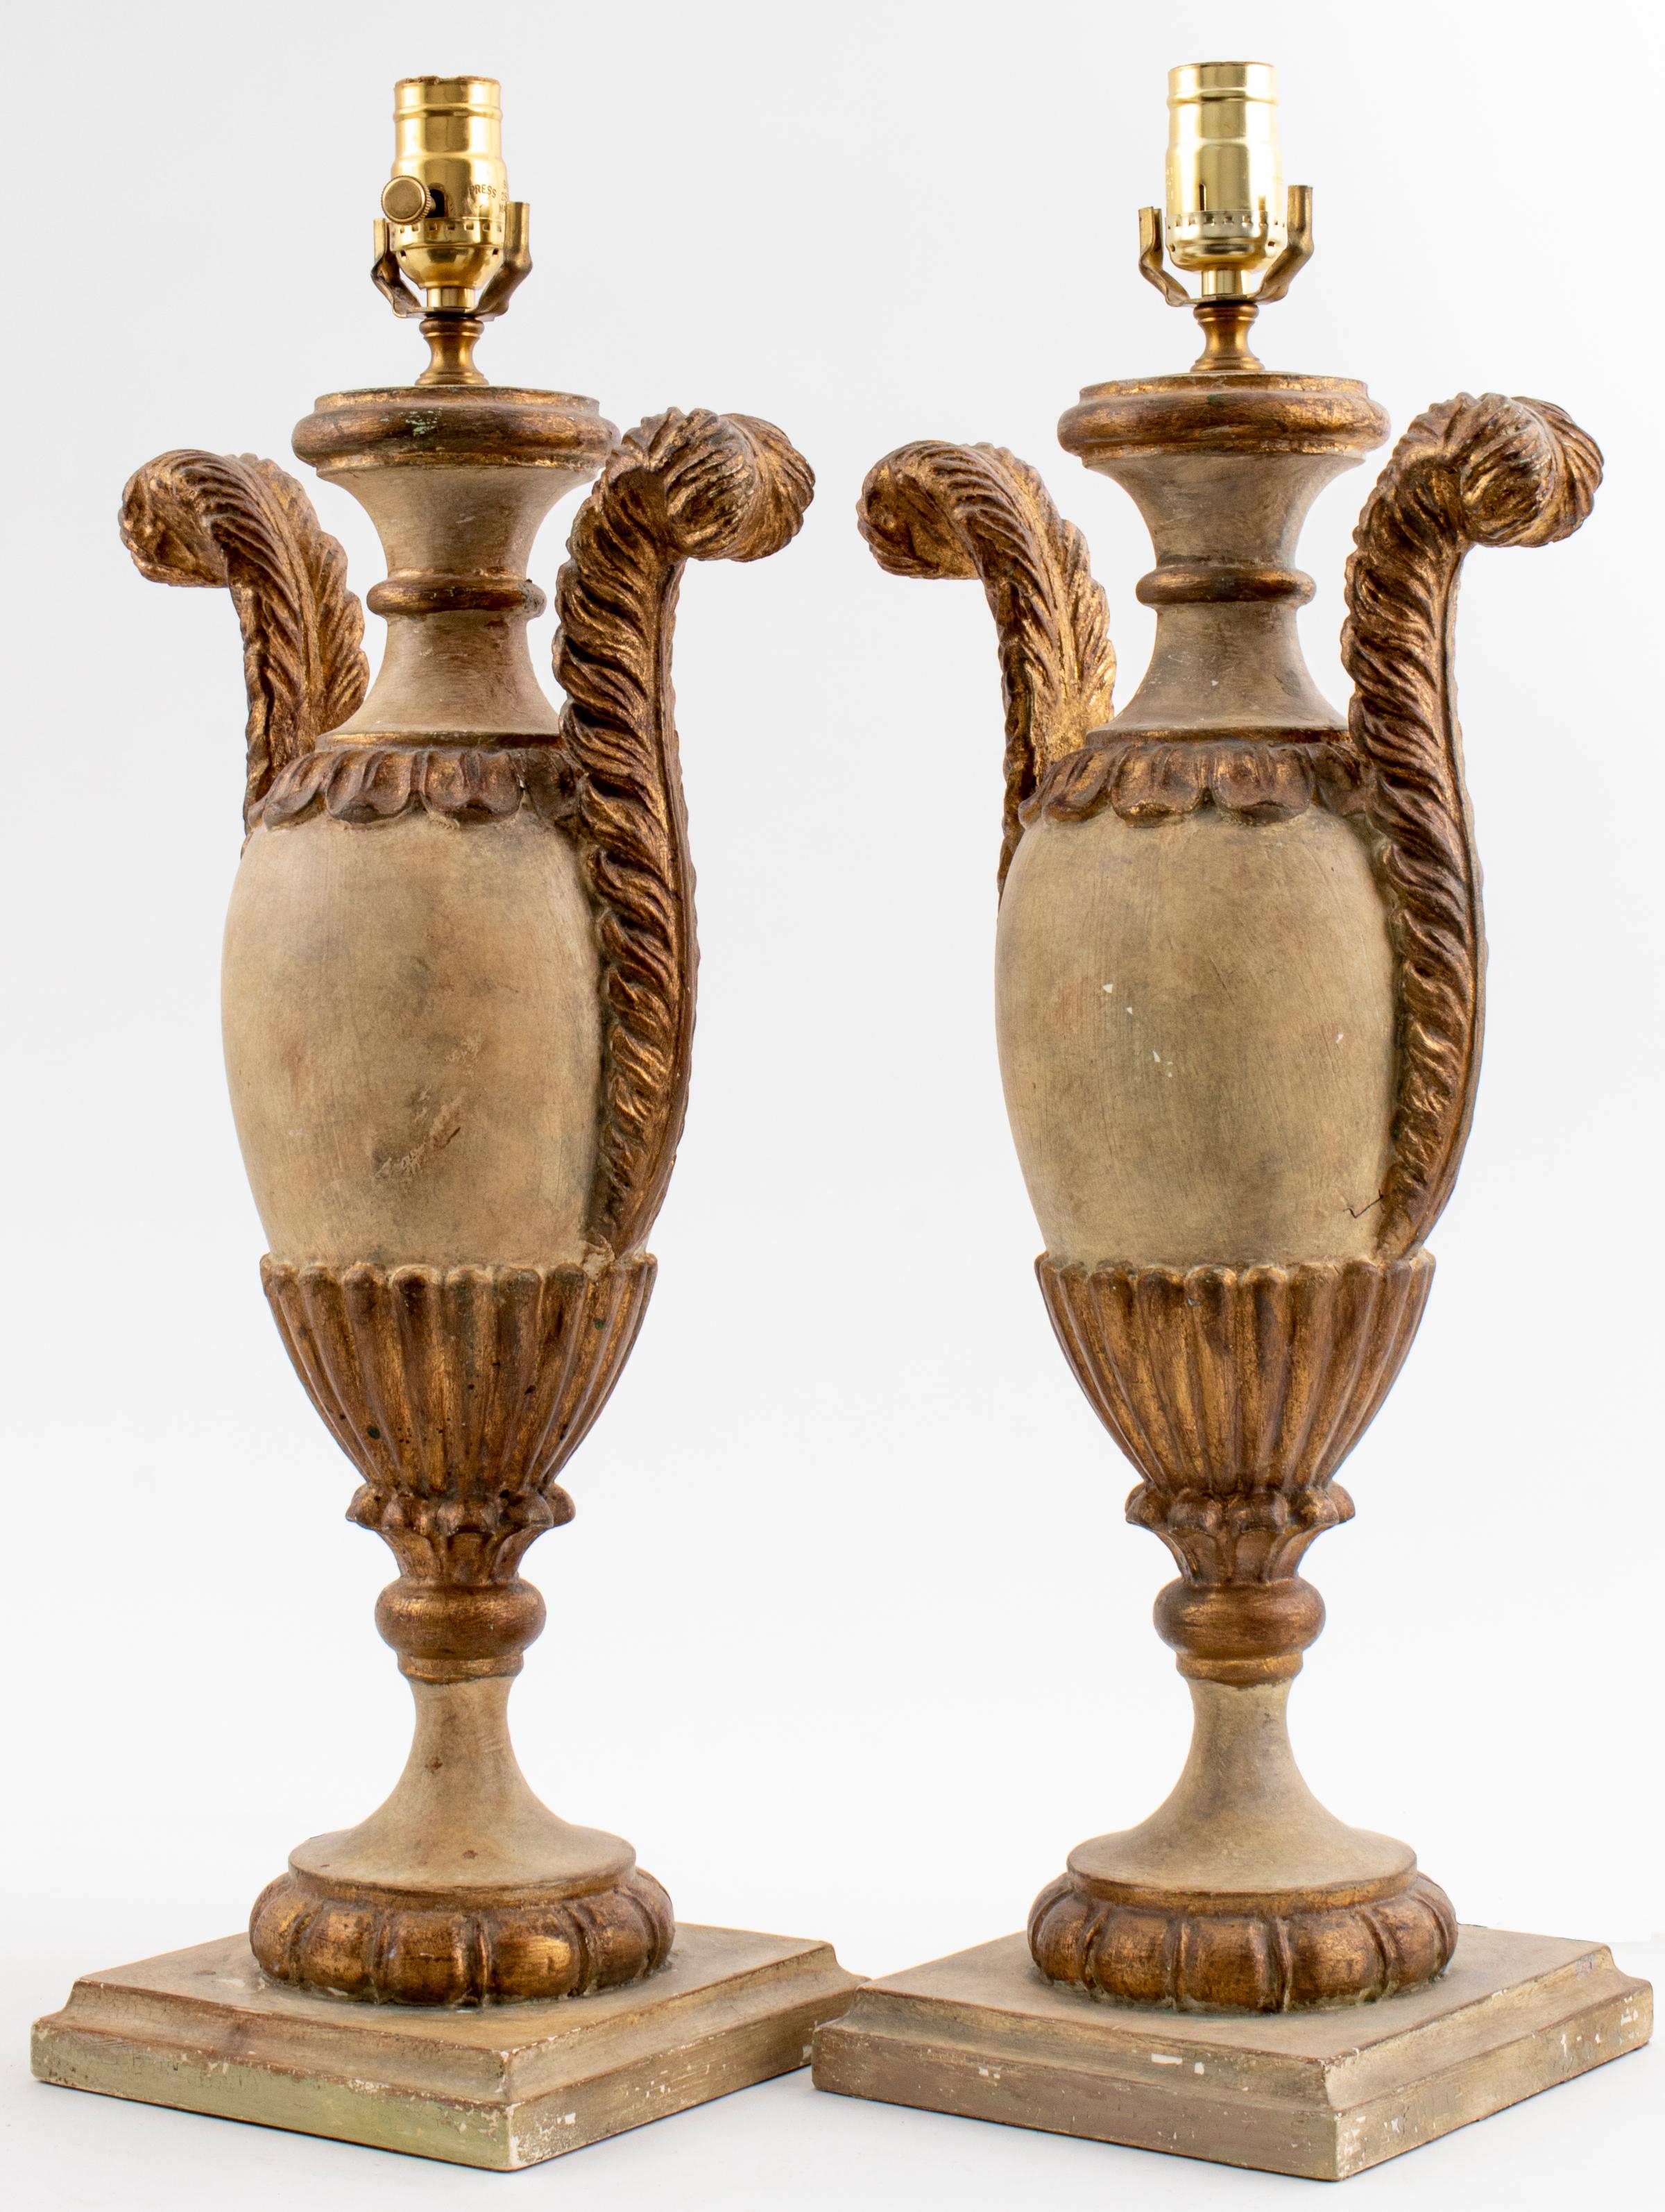 Pair of Italian Rococo style cream painted table lamps, in the 18th century taste, decorated with acanthus and lobed motifs, on stepped plinth bases. Measures: 23” height to fixture x 9.75” diameter.